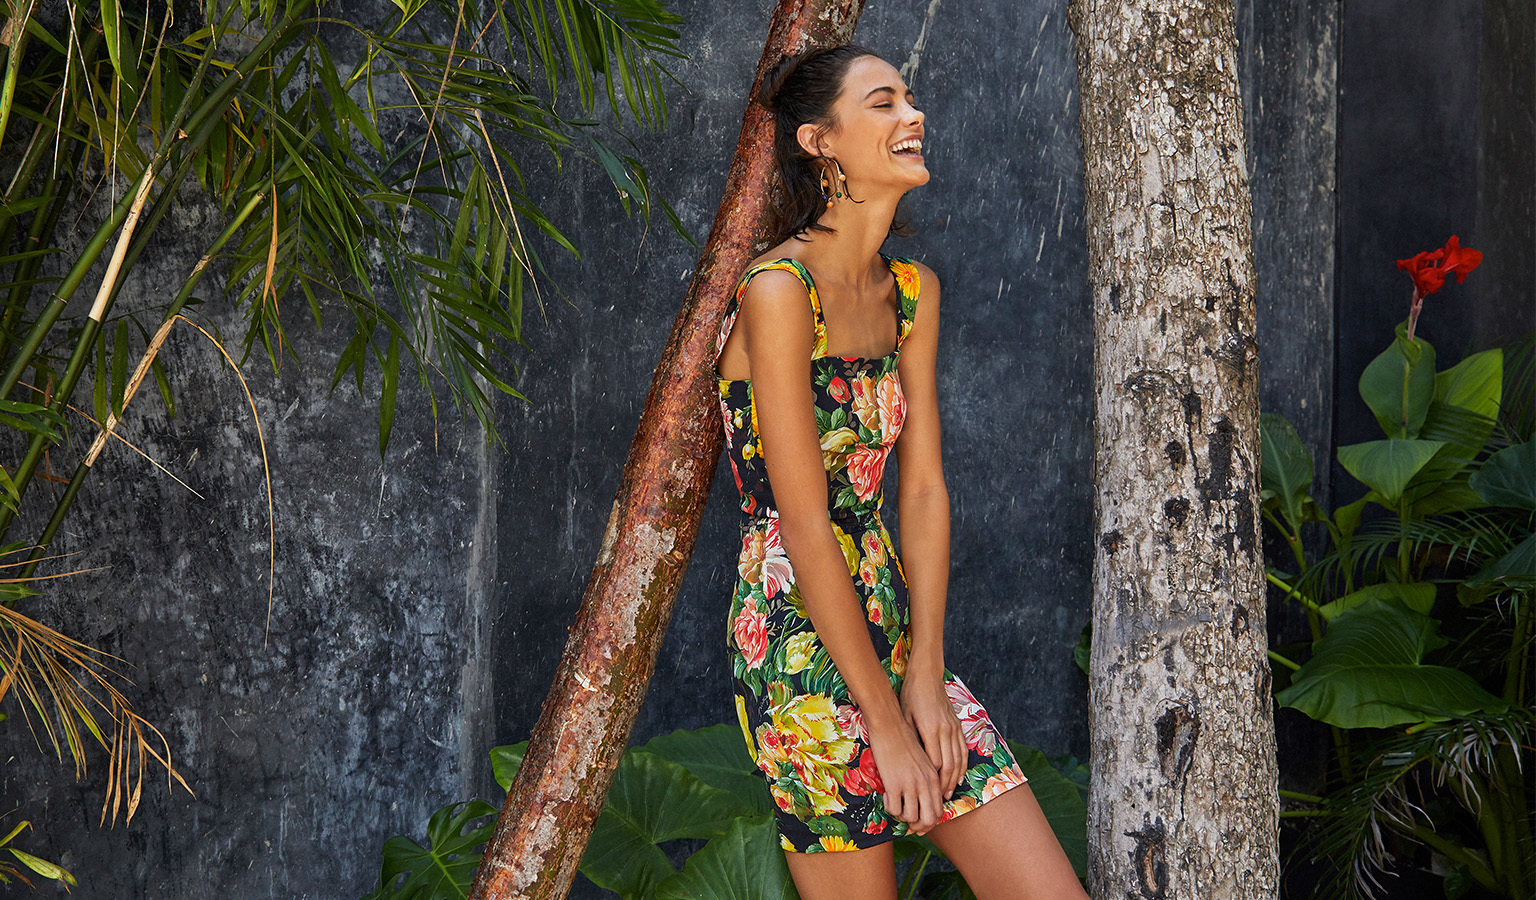 101 Stunning Looks From the Resort 2019 Collections - theFashionSpot